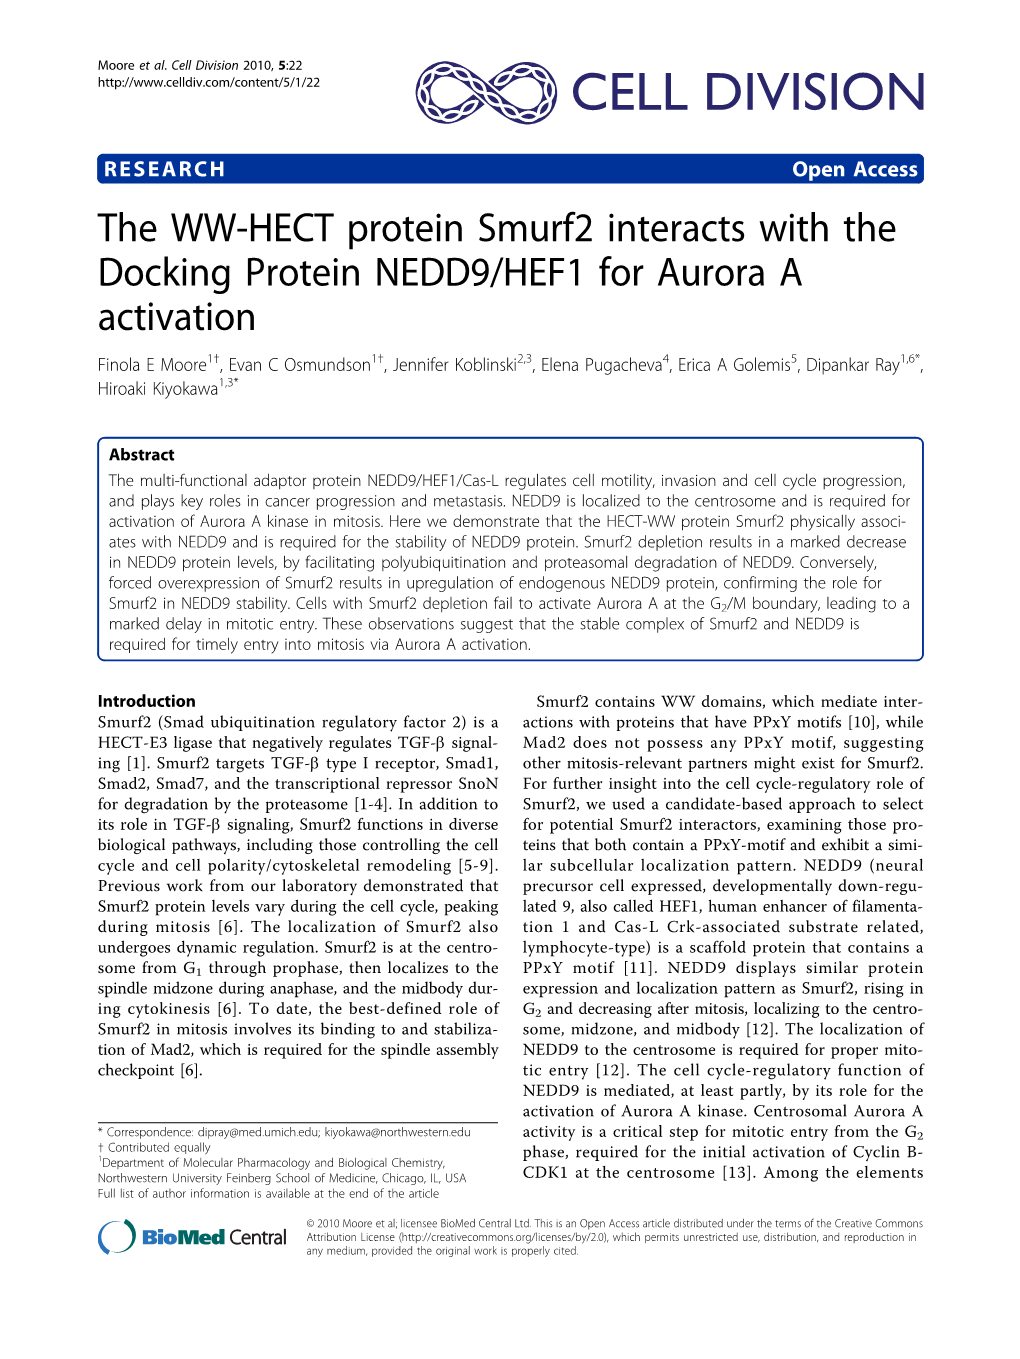 The WW-HECT Protein Smurf2 Interacts with the Docking Protein